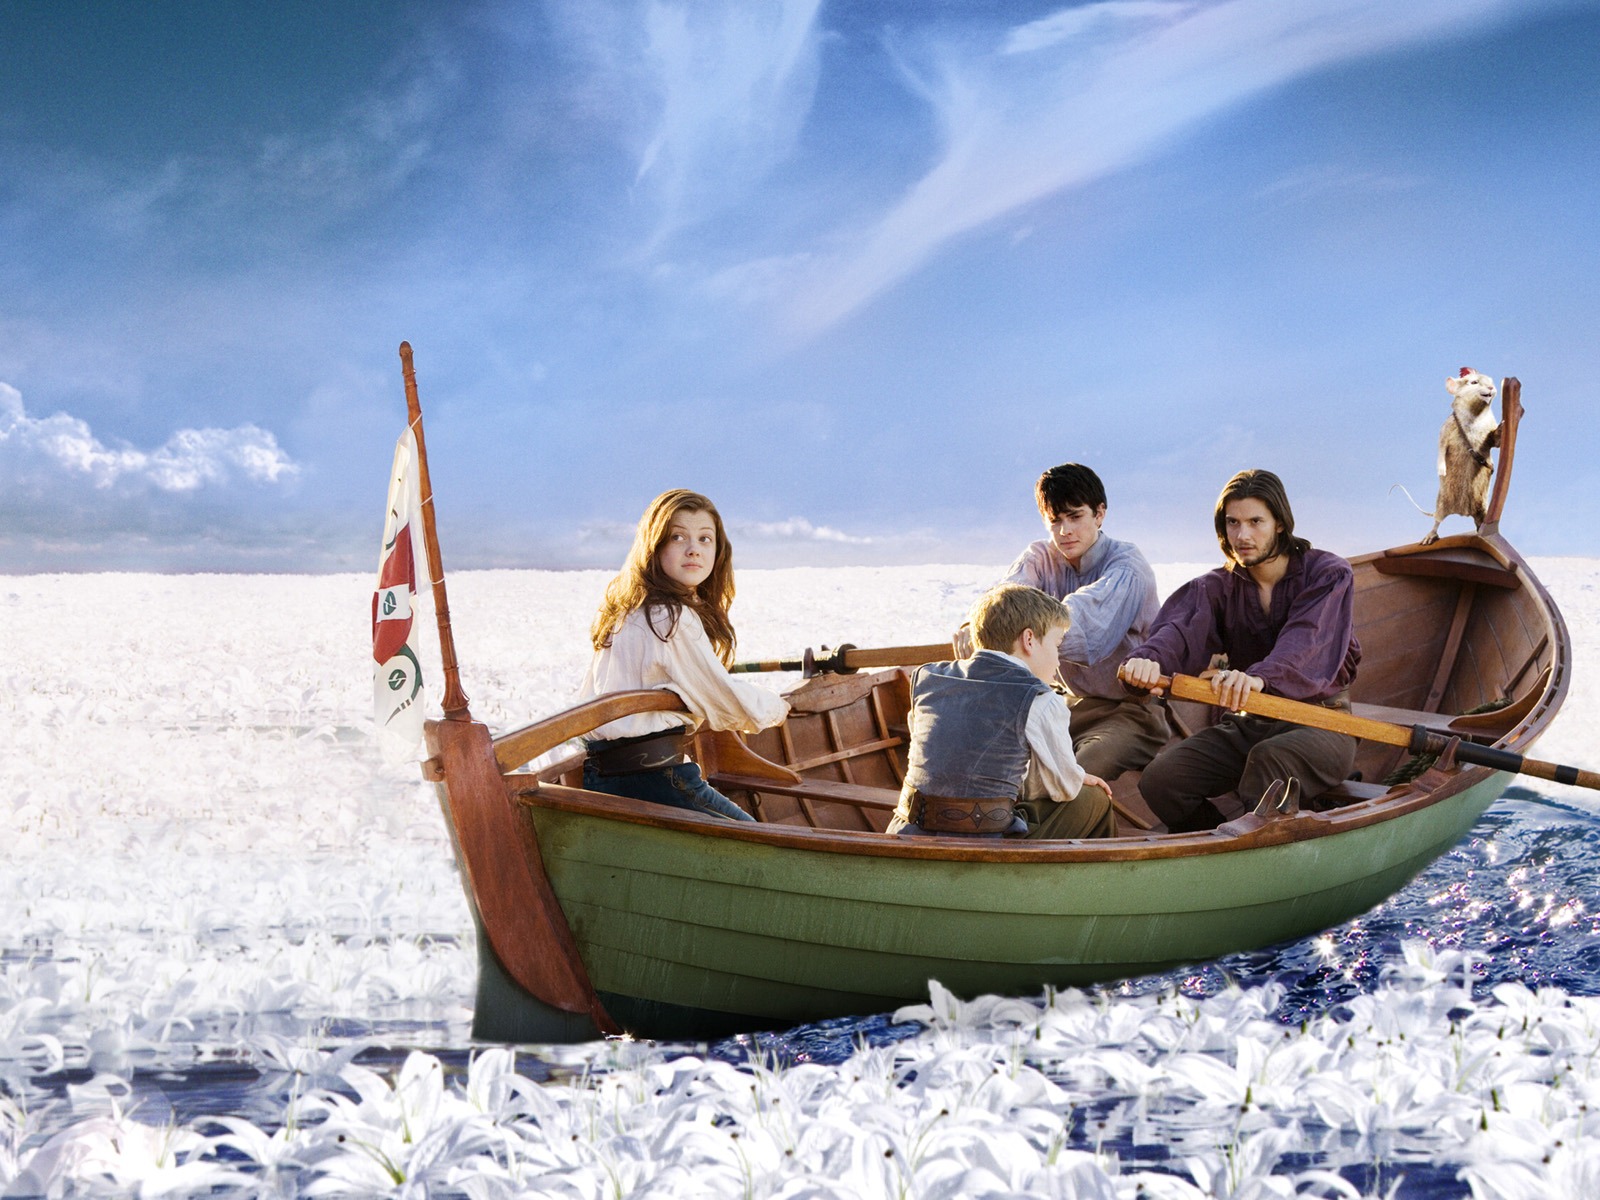 The Chronicles of Narnia: The Voyage of the Dawn Treader wallpapers #12 - 1600x1200